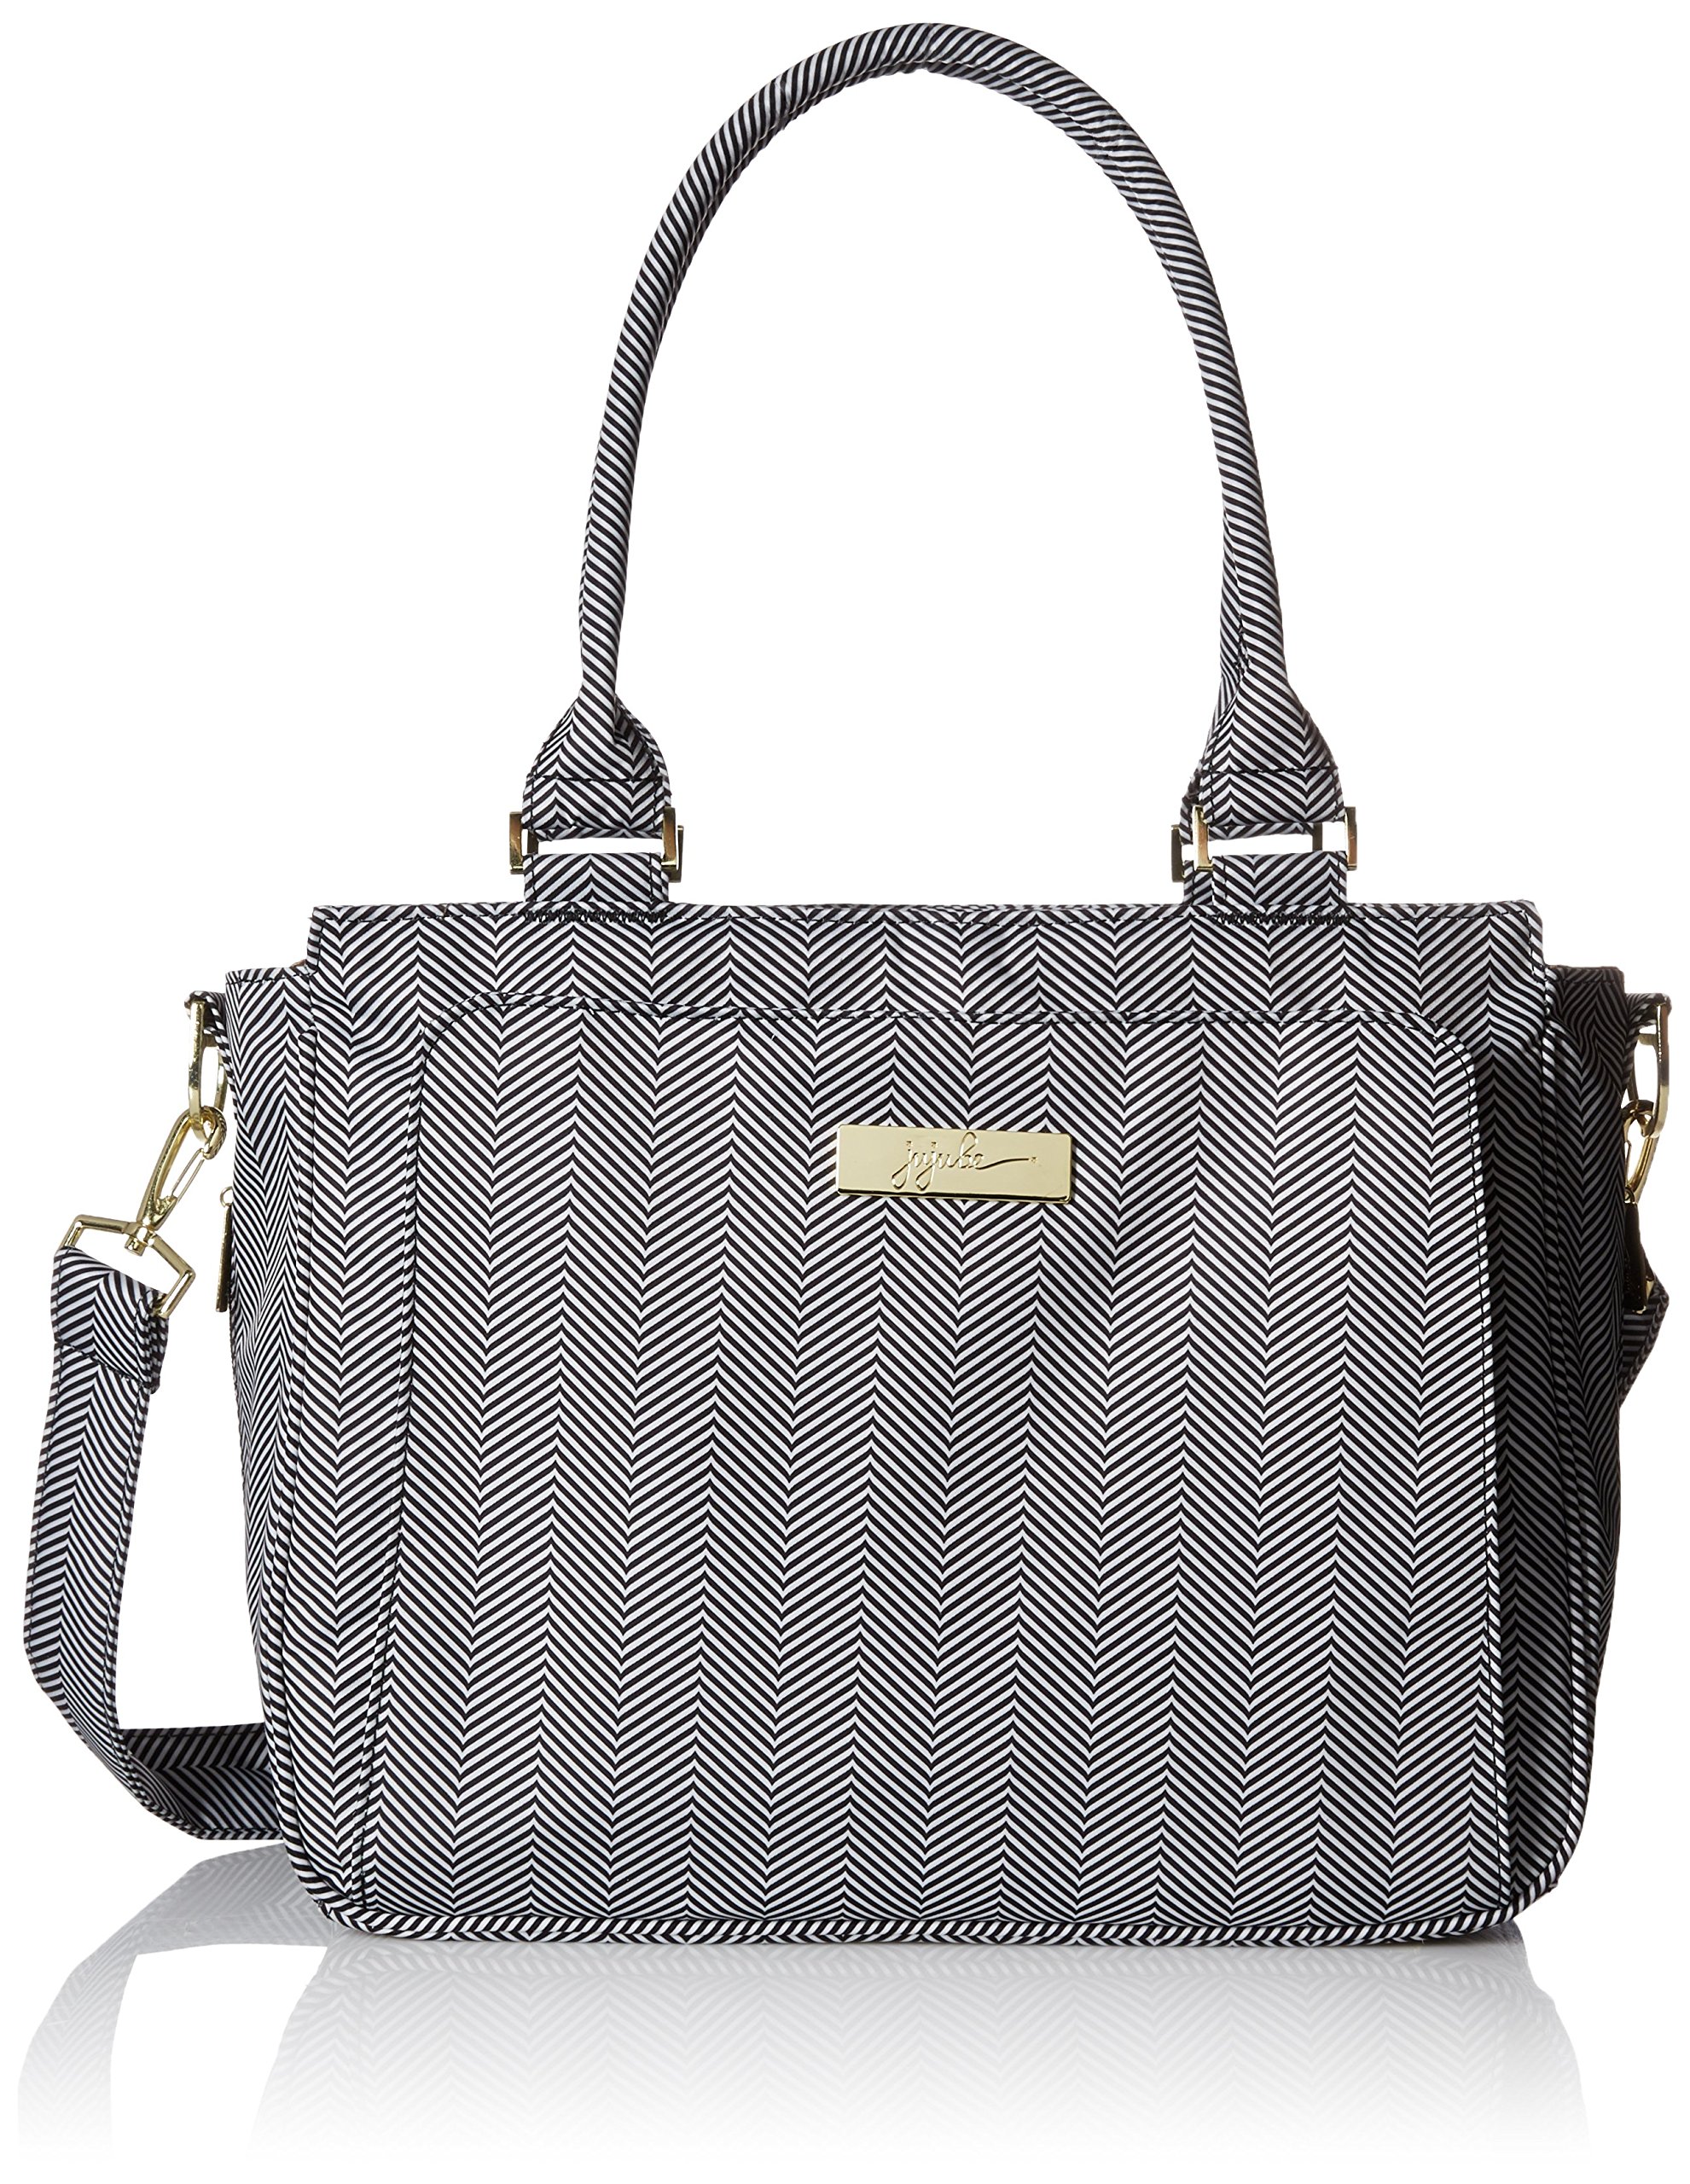 Ju-Ju-Be Be classy Diaper Bag - The commodore (The Queen of The Nile)